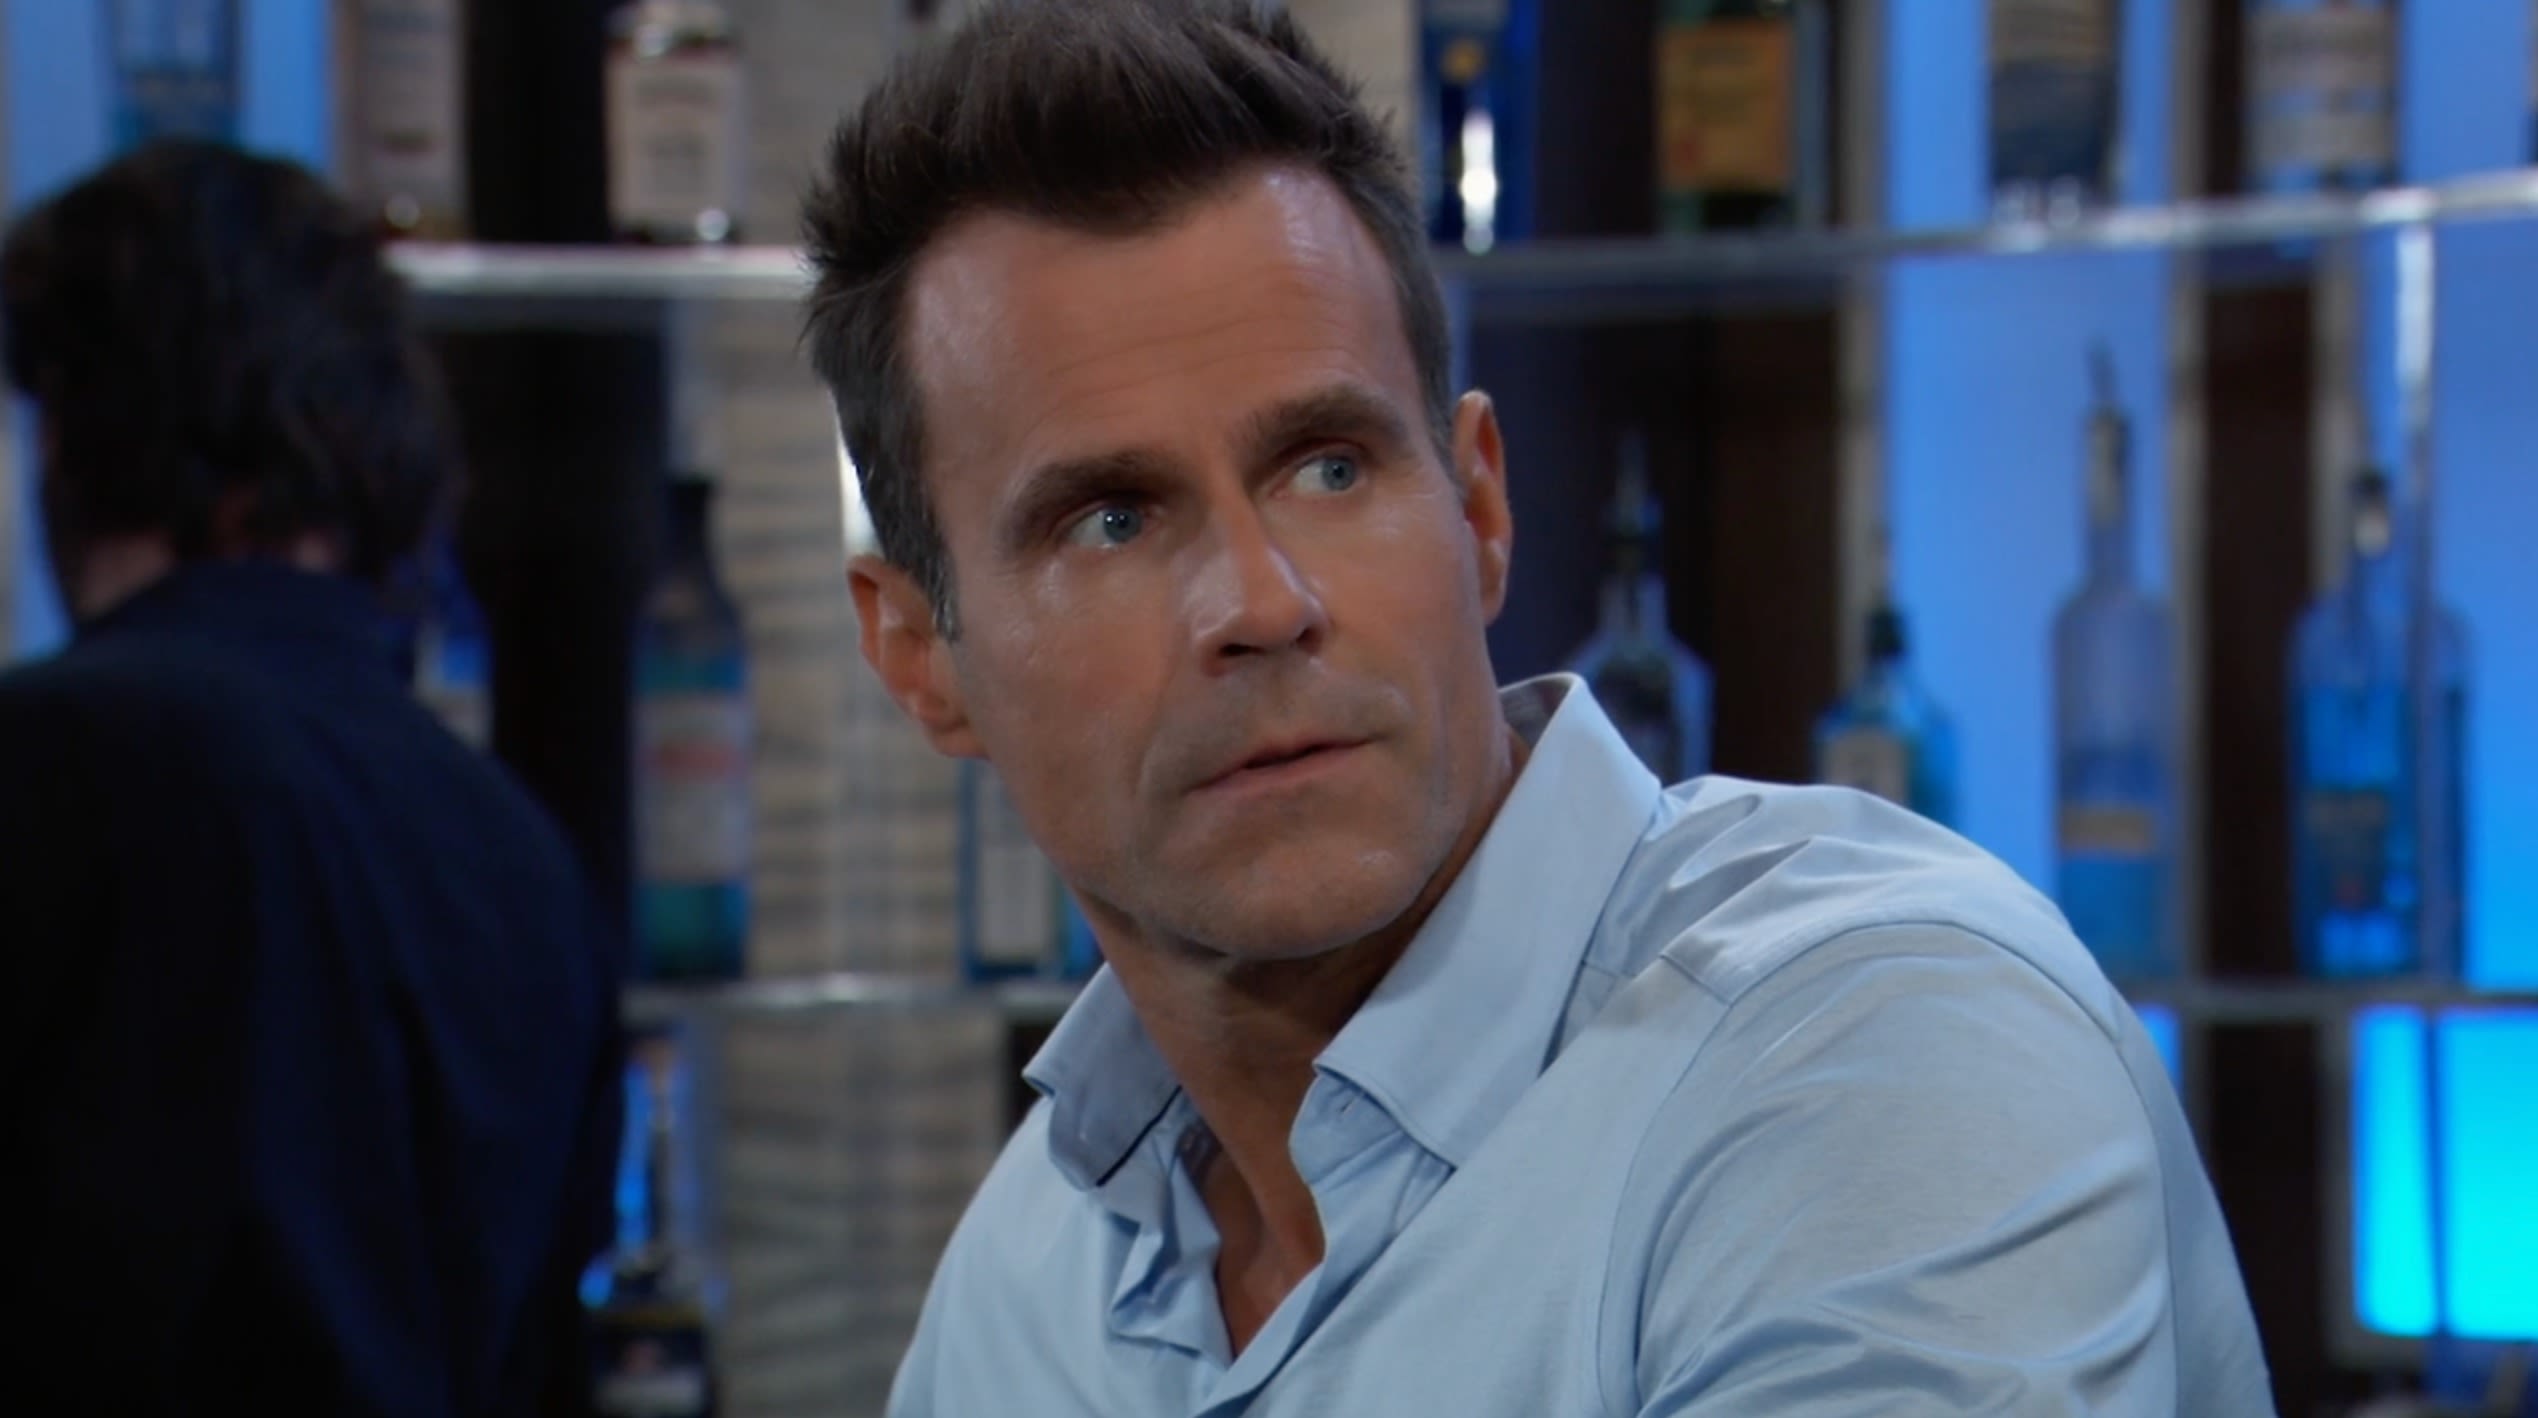 General Hospital spoilers: Drew’s campaign flops and he blames one person?